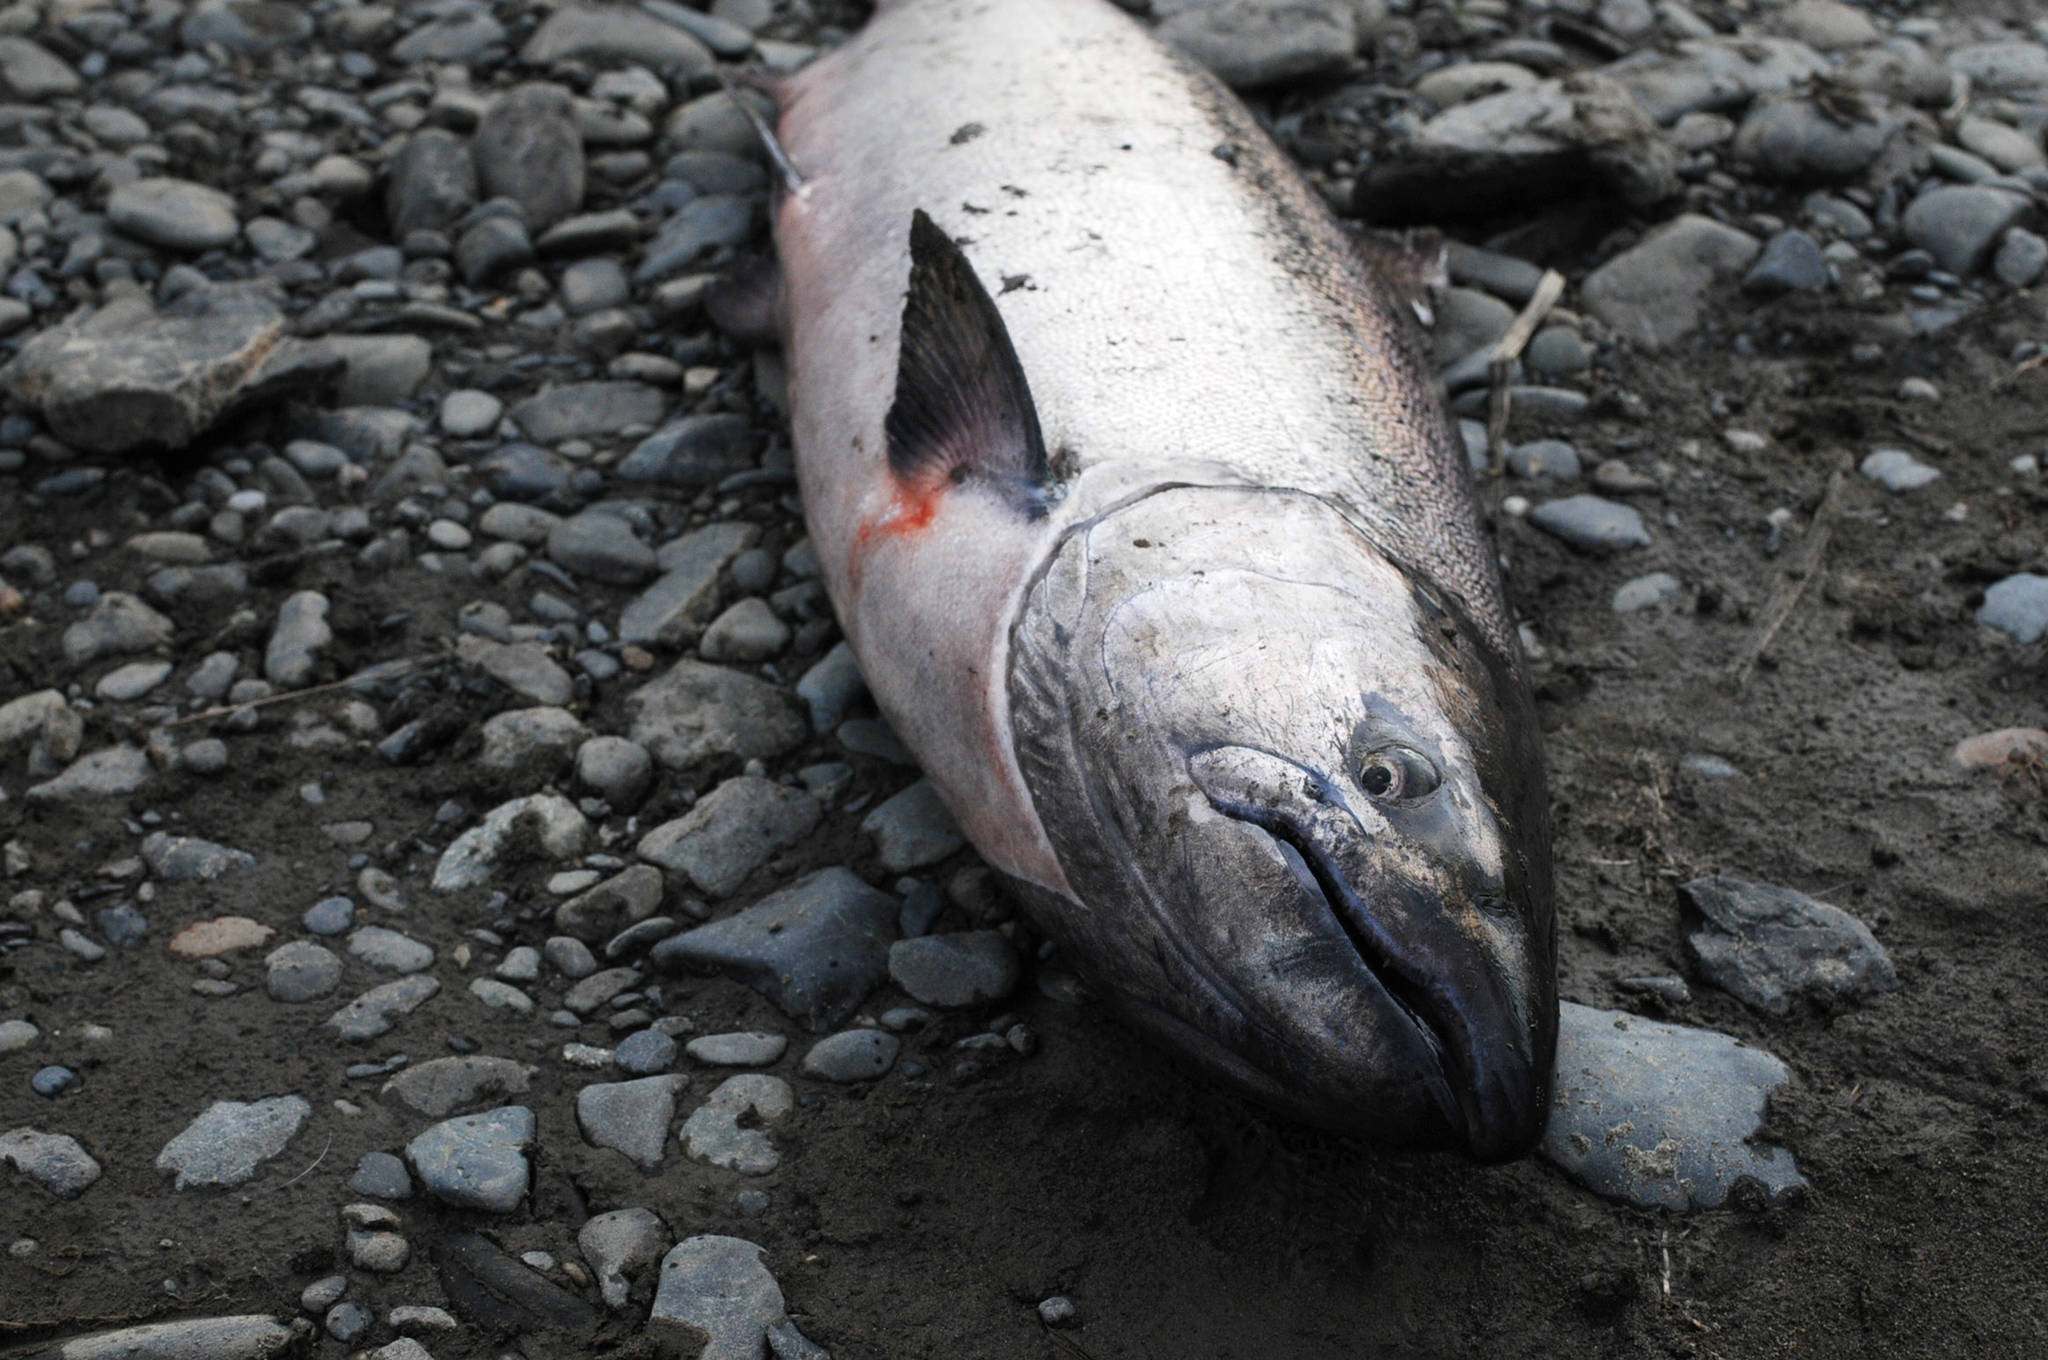 An Anchor River king salmon landed by Anchorage resident Terry Umatum lies on the bank Saturday, May 19, 2018 in Anchor Point, Alaska. (Photo by Elizabeth Earl/Peninsula Clarion)